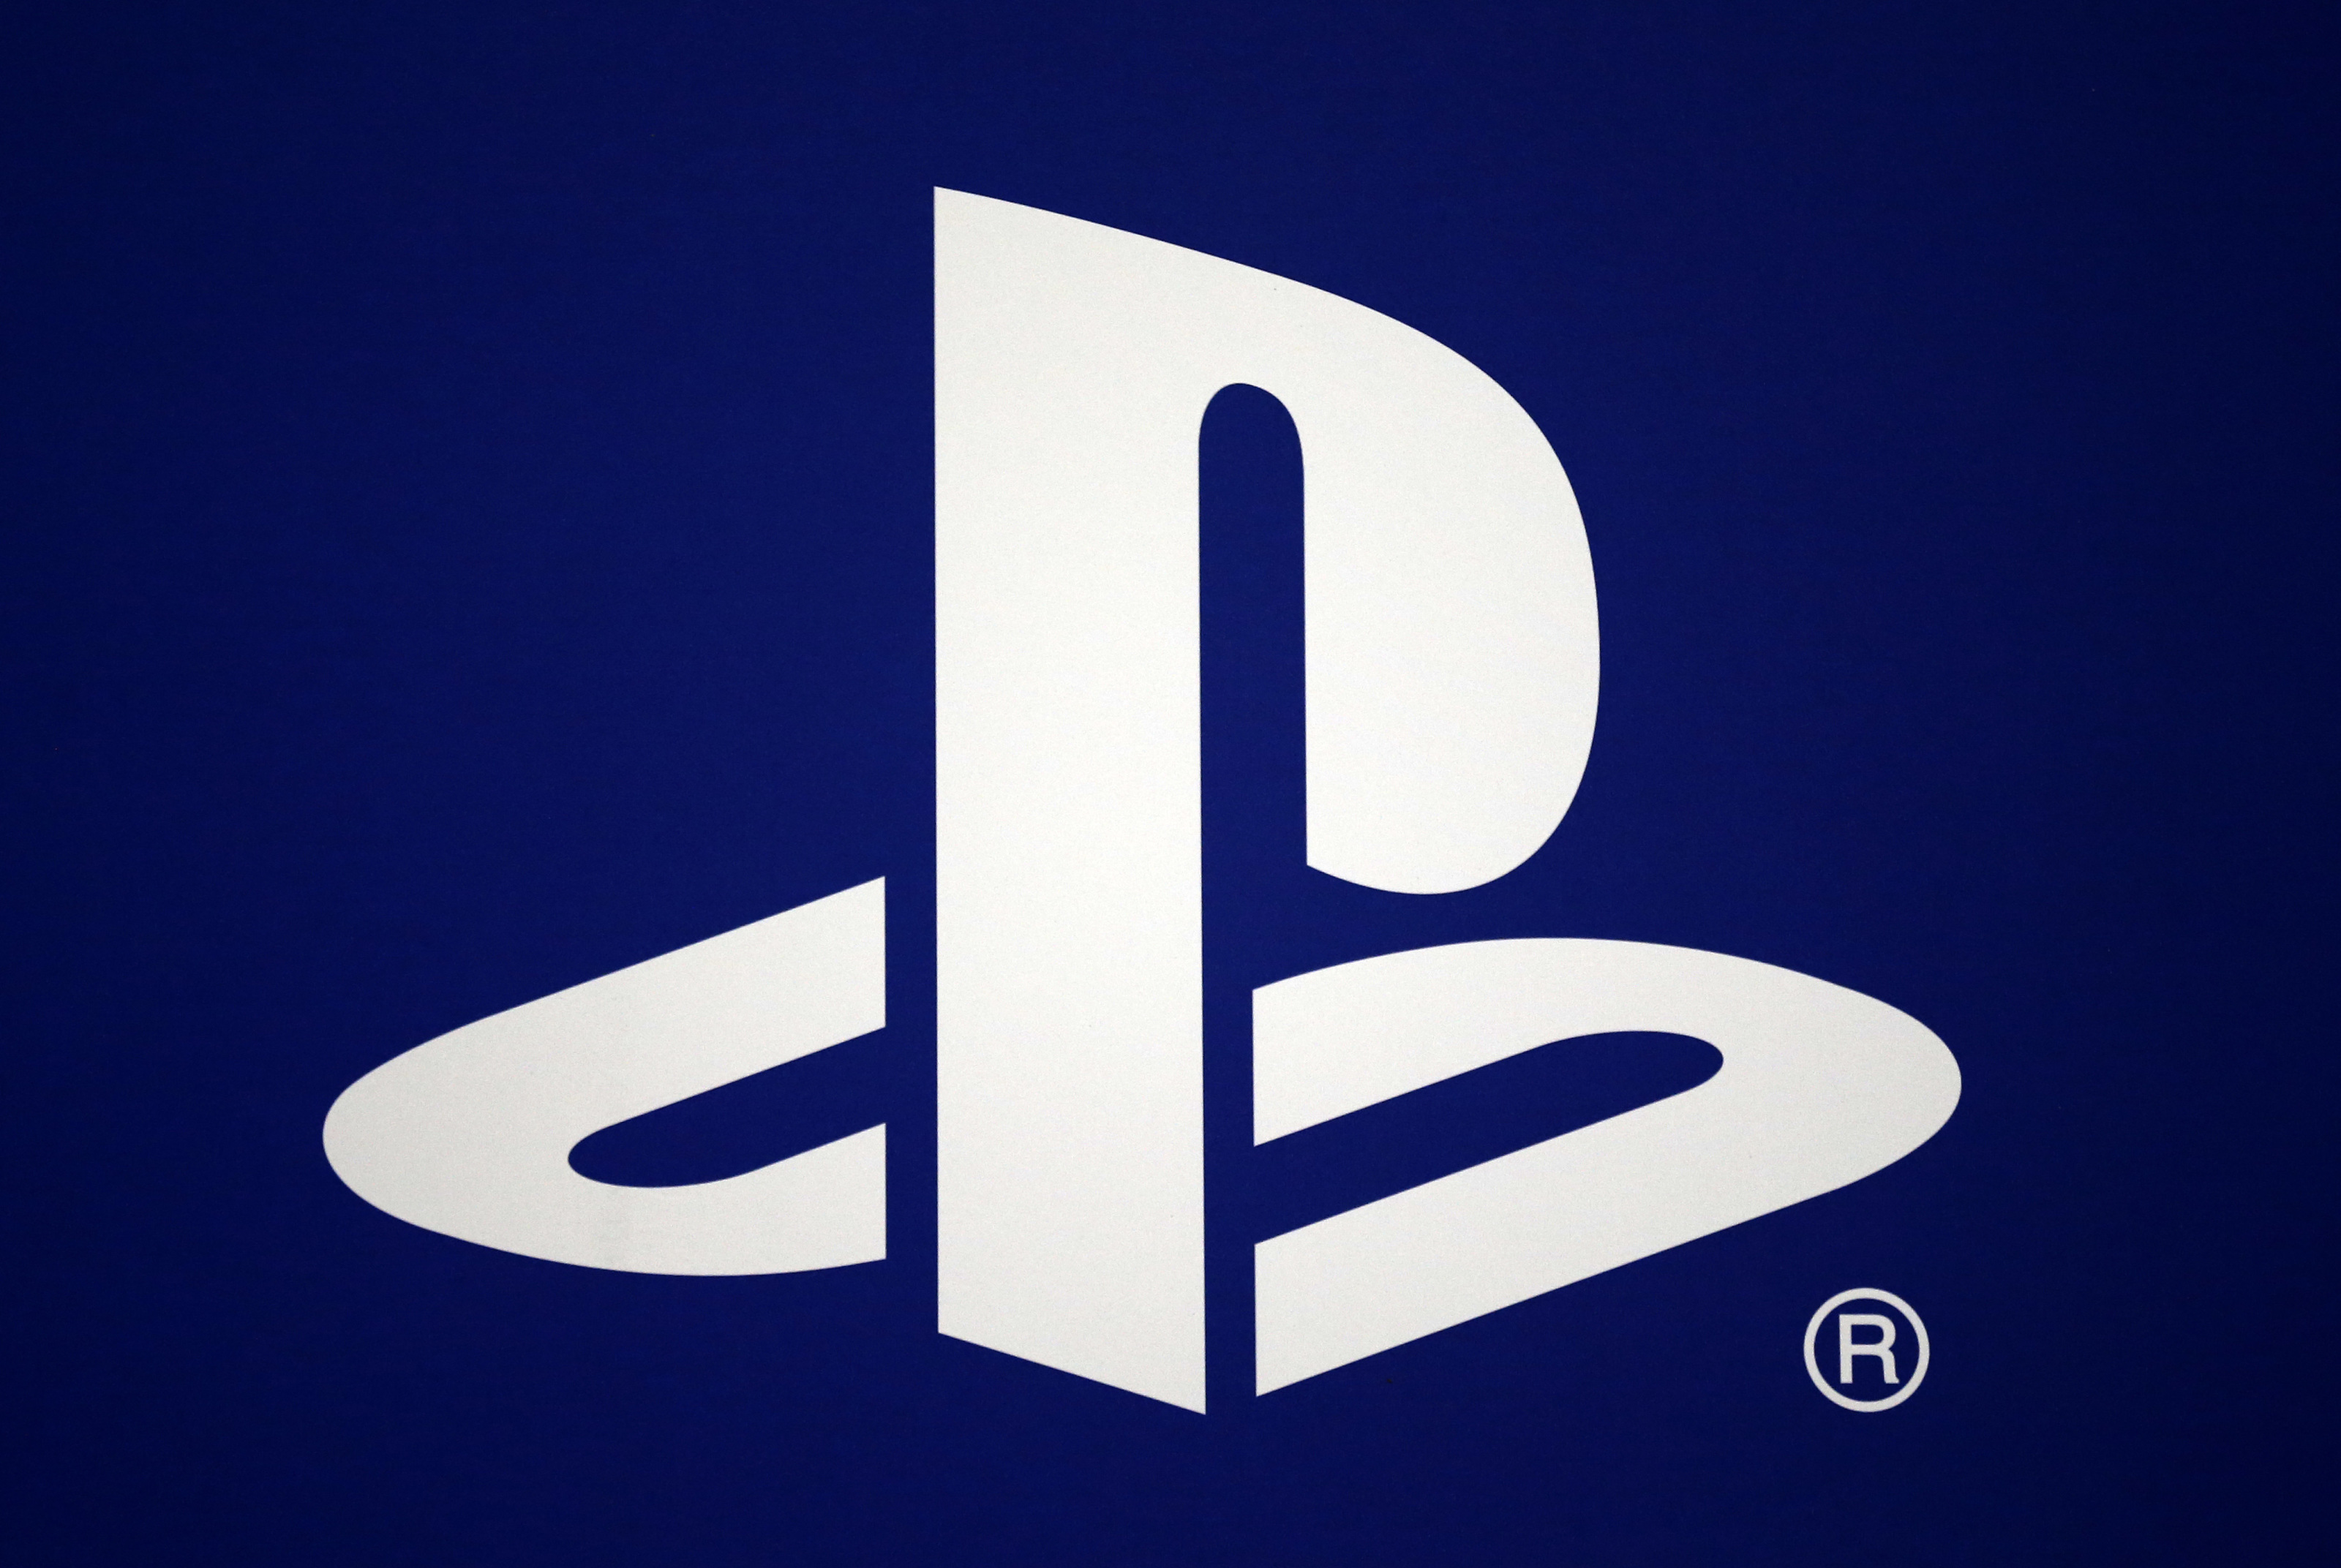 PS4 to PS5: All Games with Confirmed Free Upgrades